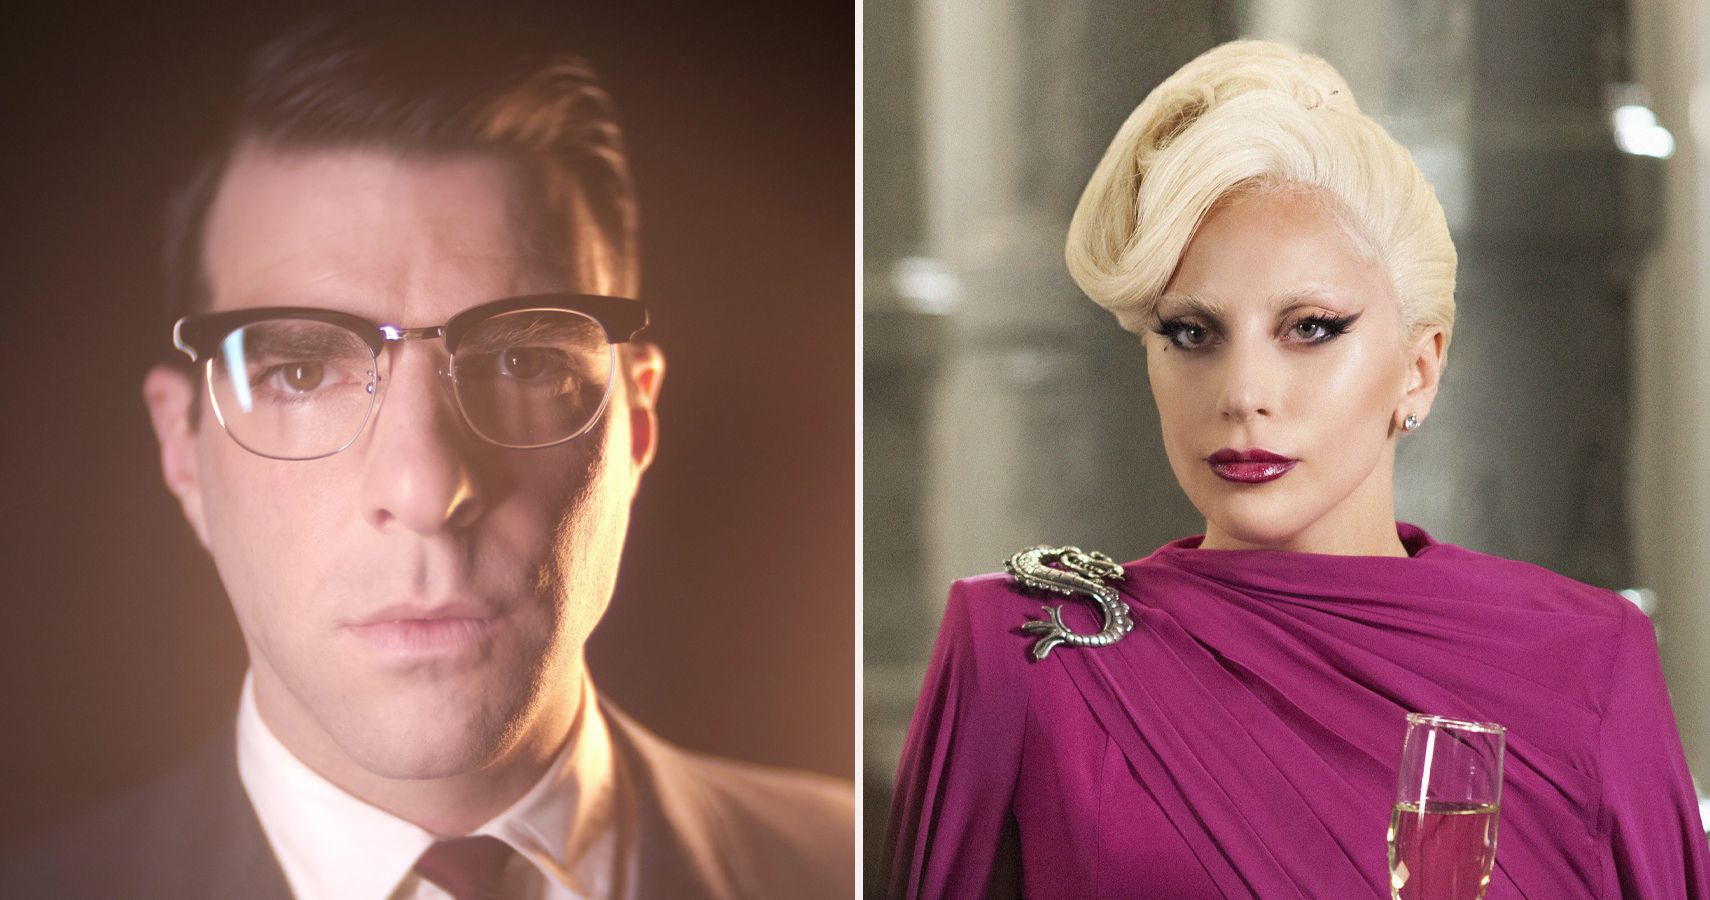 10 Most Iconic American Horror Story Characters